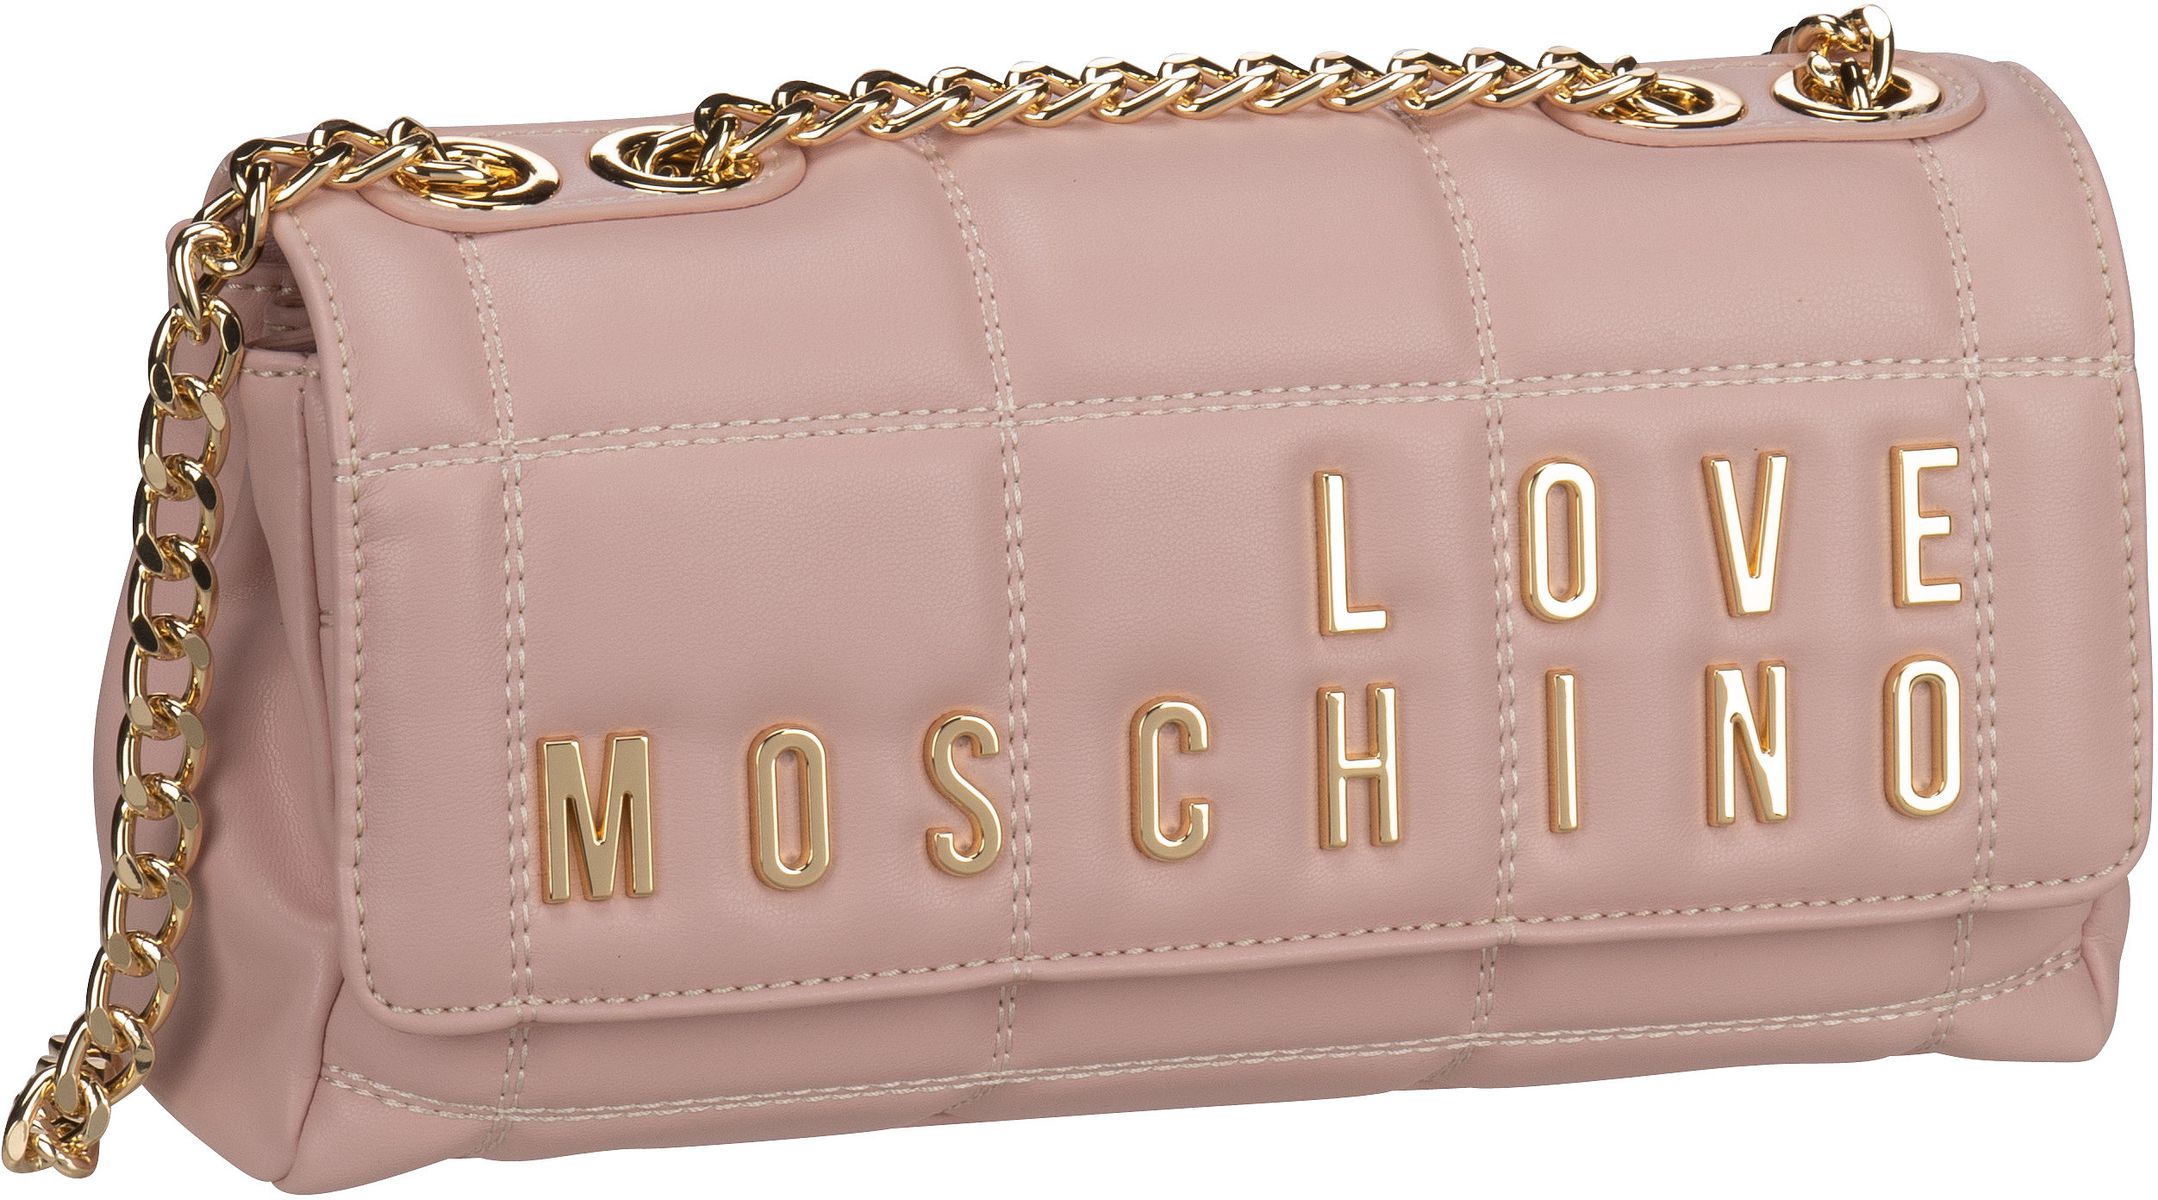 Love Moschino Embroidery Quilted Shoulder Bag 4260 - Nude